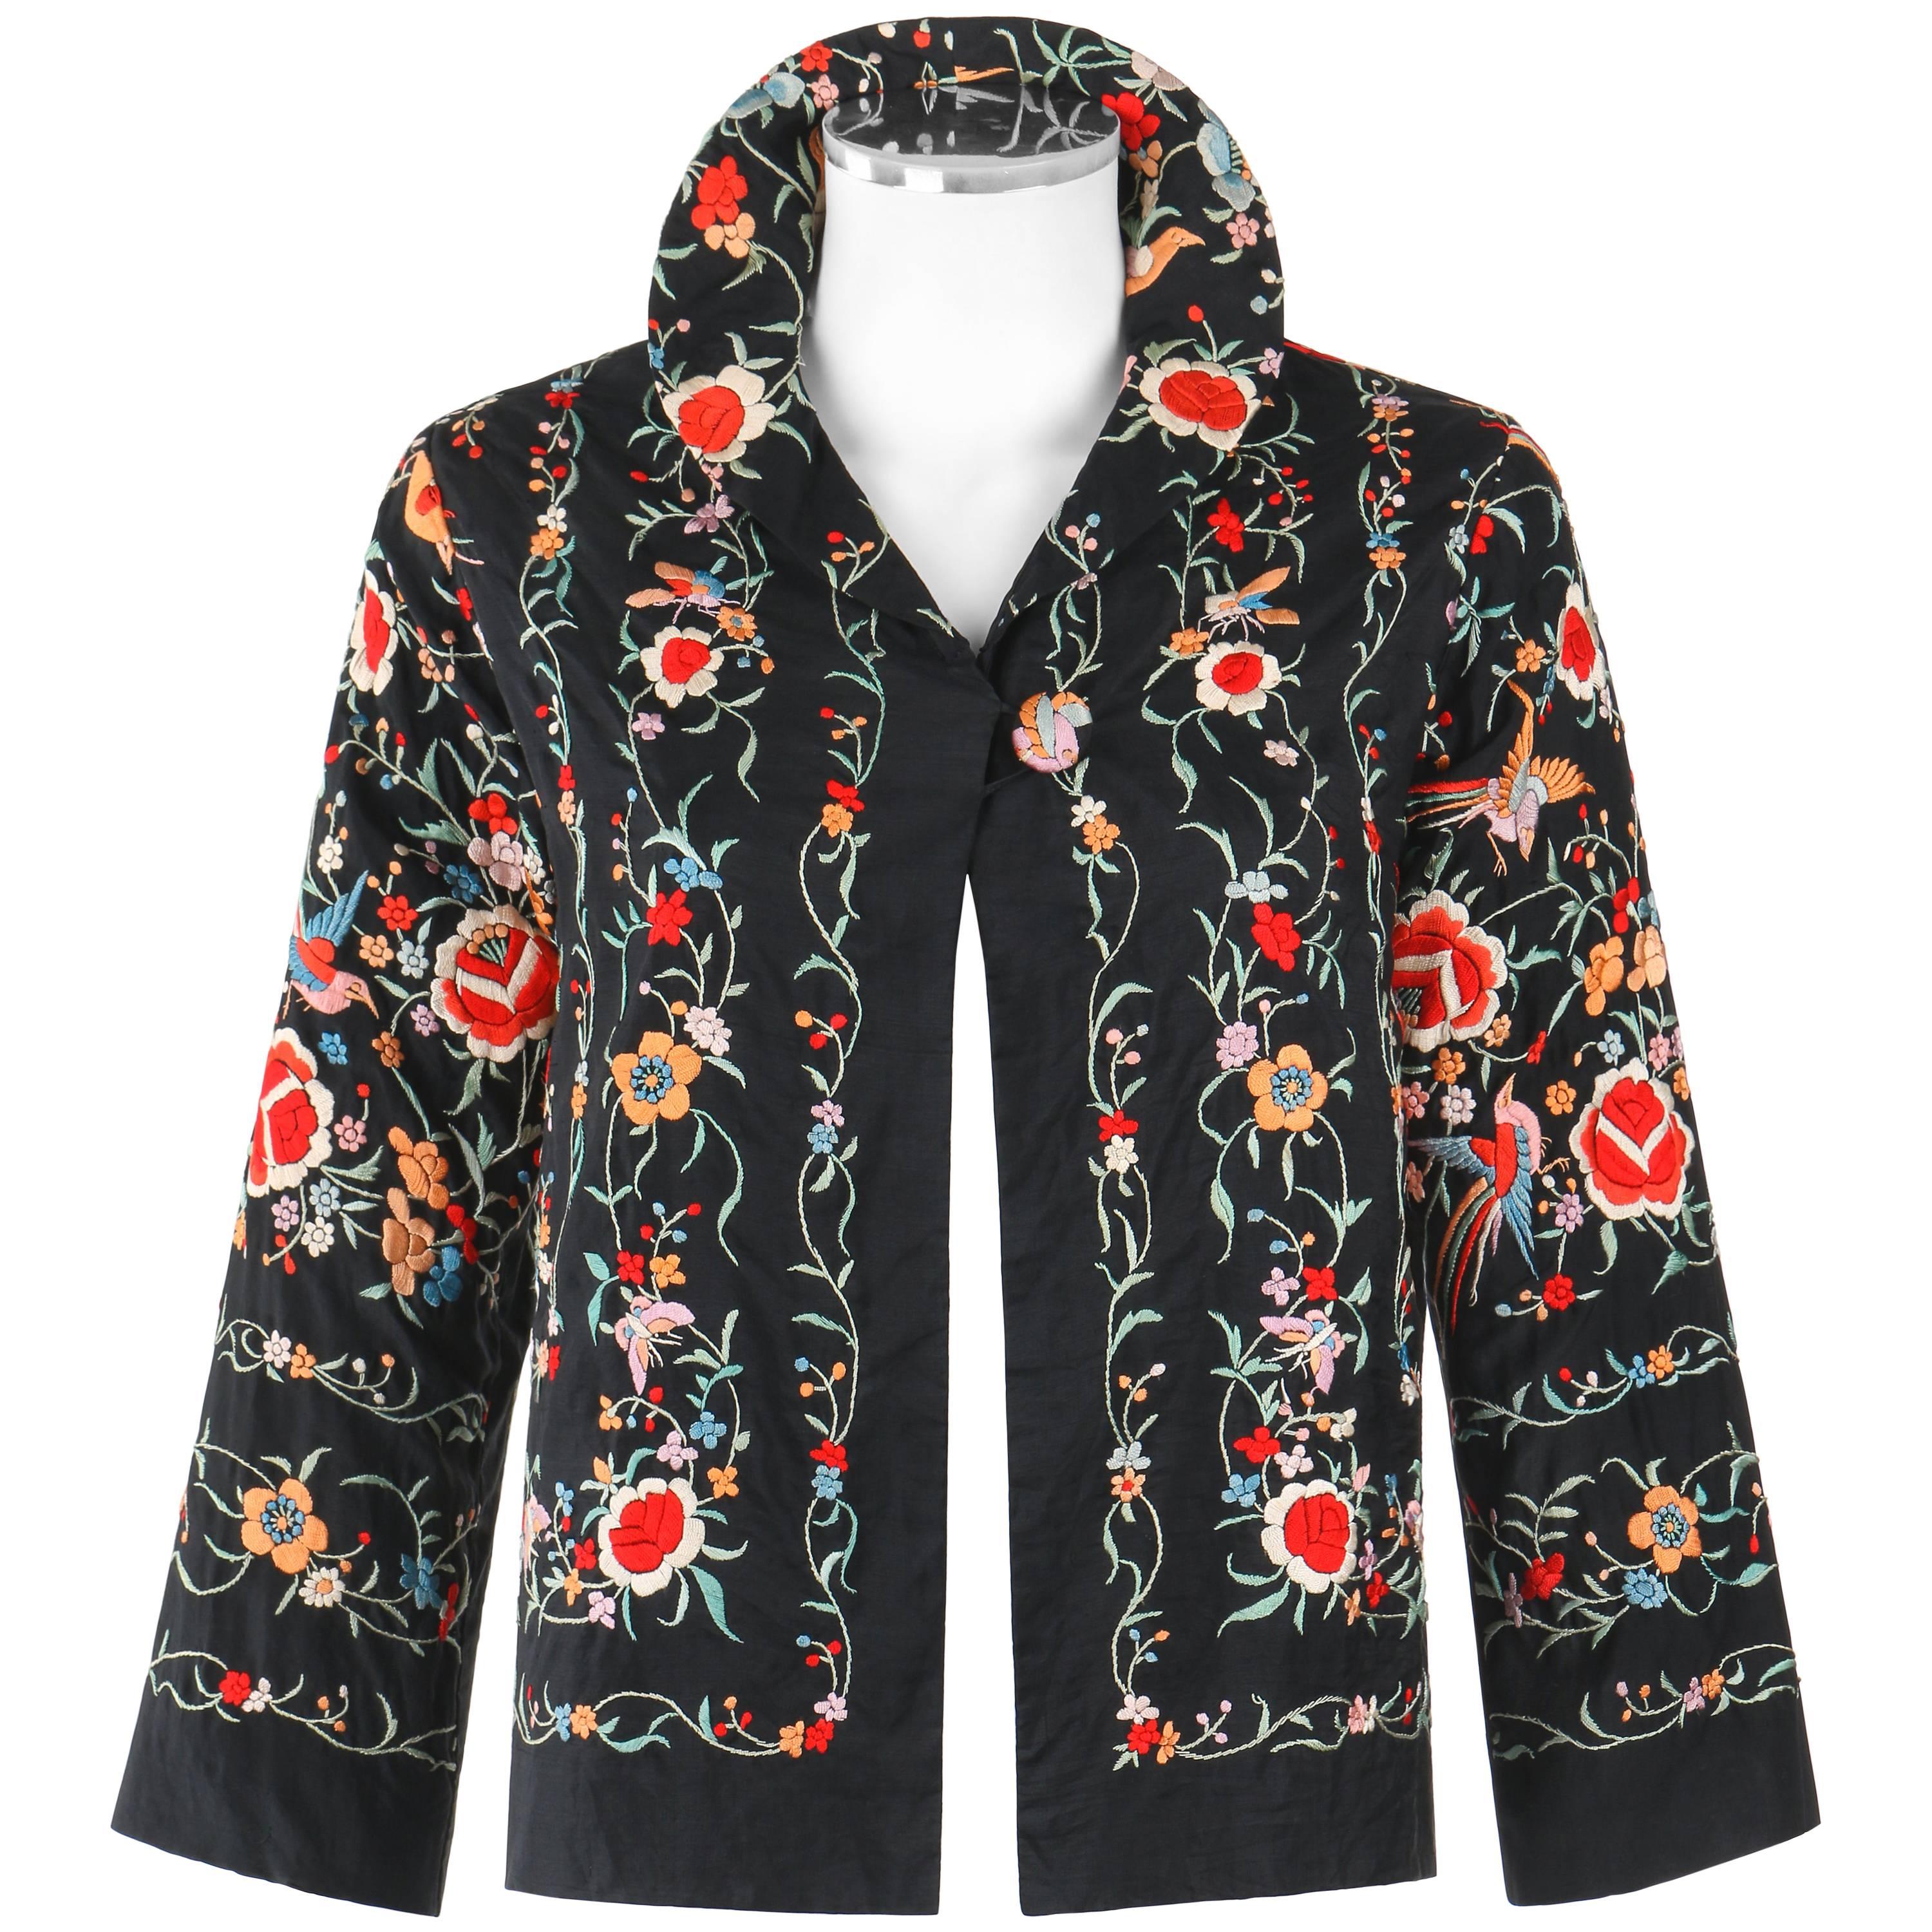 COUTURE c.1920's Black Silk Multicolor Chinese Floral Embroidered Jacket